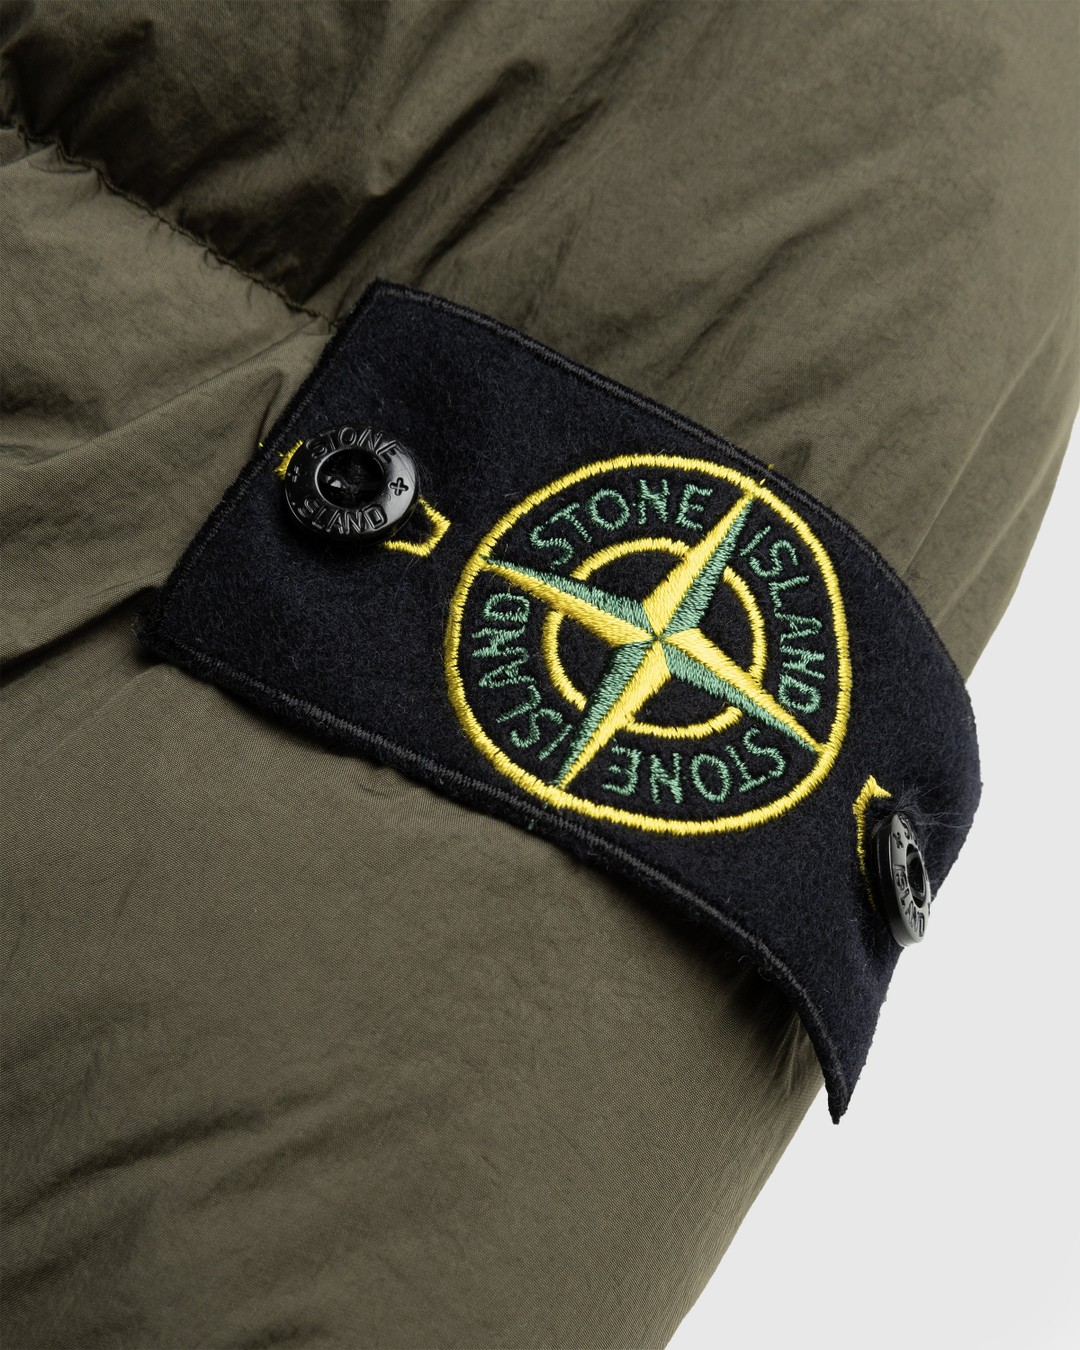 Stone Island – Garment-Dyed Recycled Nylon Down Jacket Olive - Outerwear - Green - Image 6